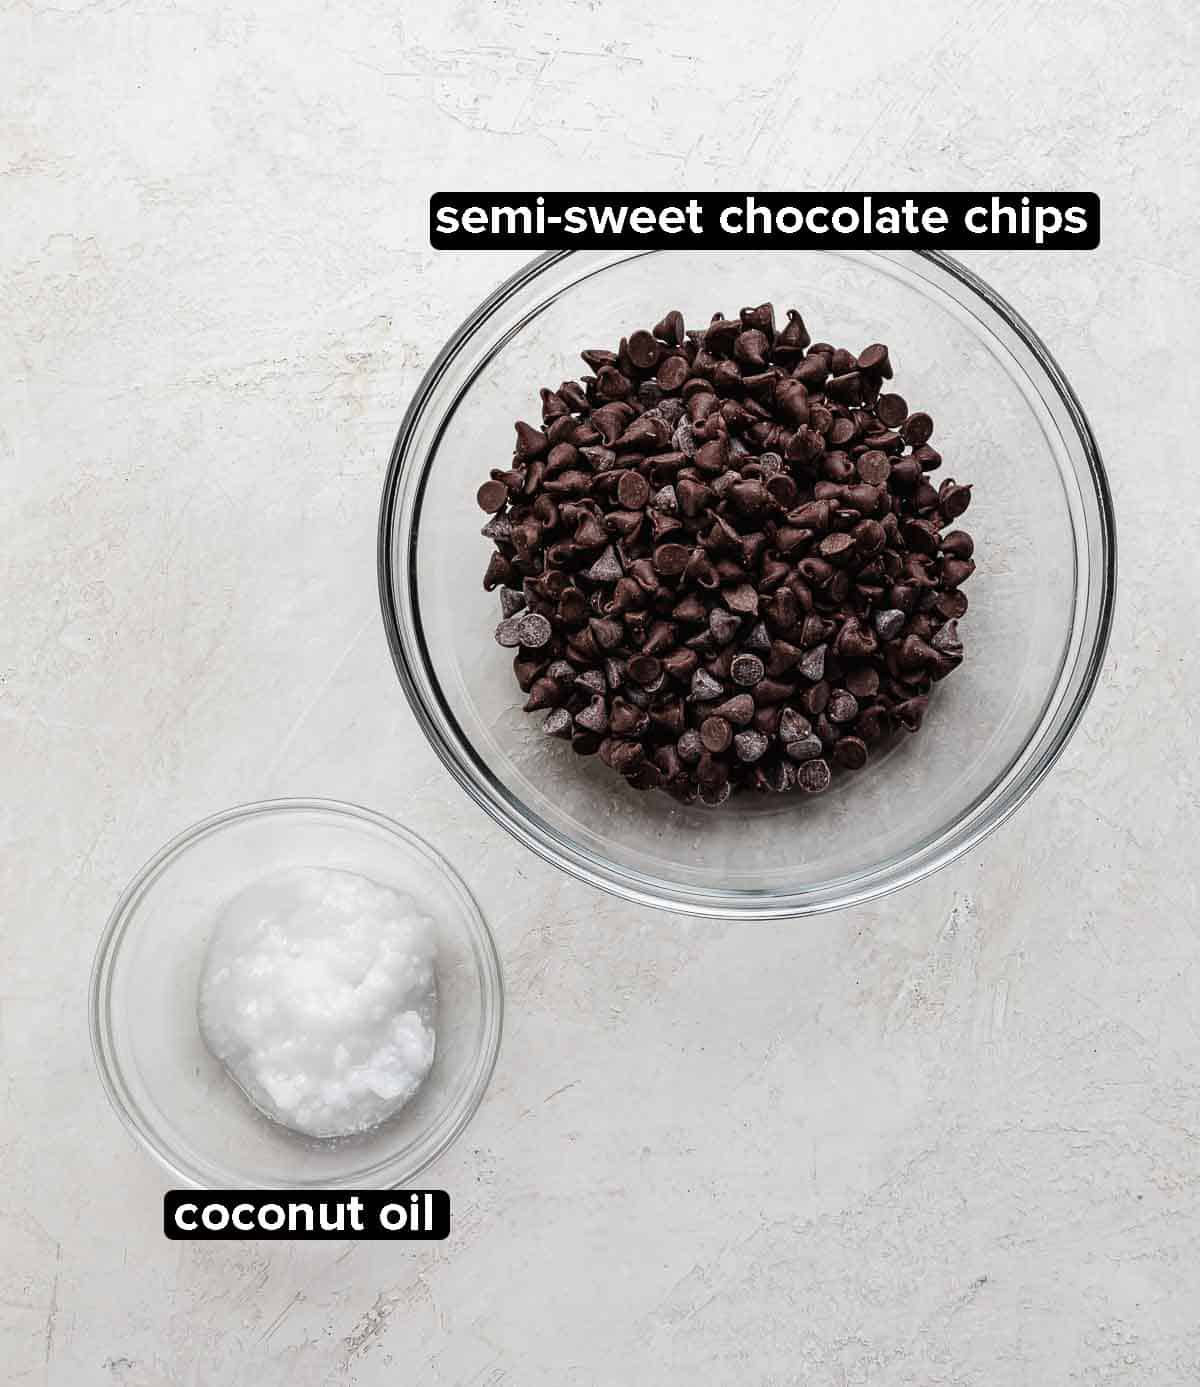 Magic Shell ingredients on a gray background: semi sweet chocolate chips and coconut oil.